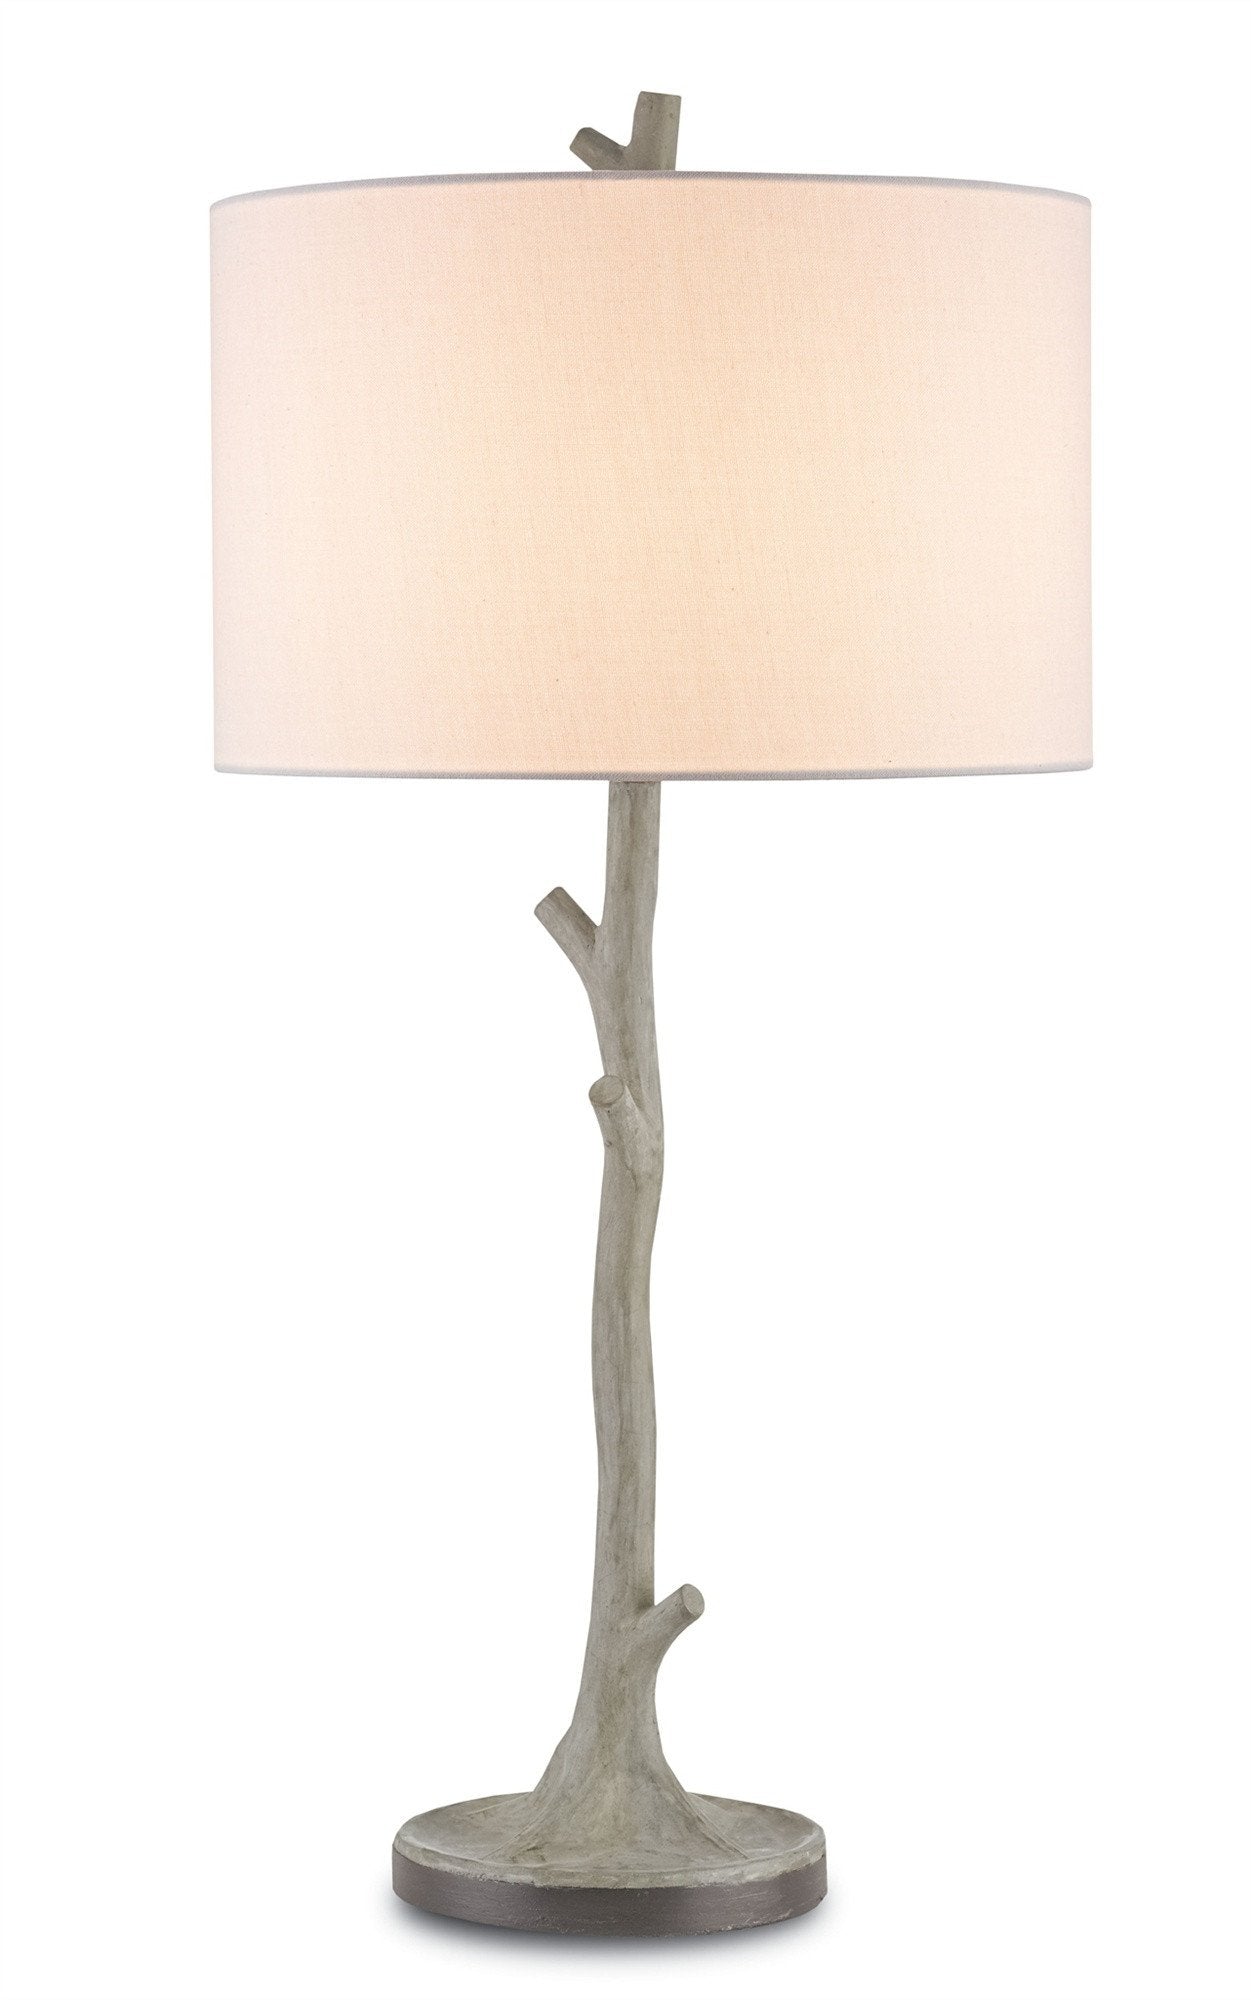 Beaujon Table Lamp design by Currey and Company